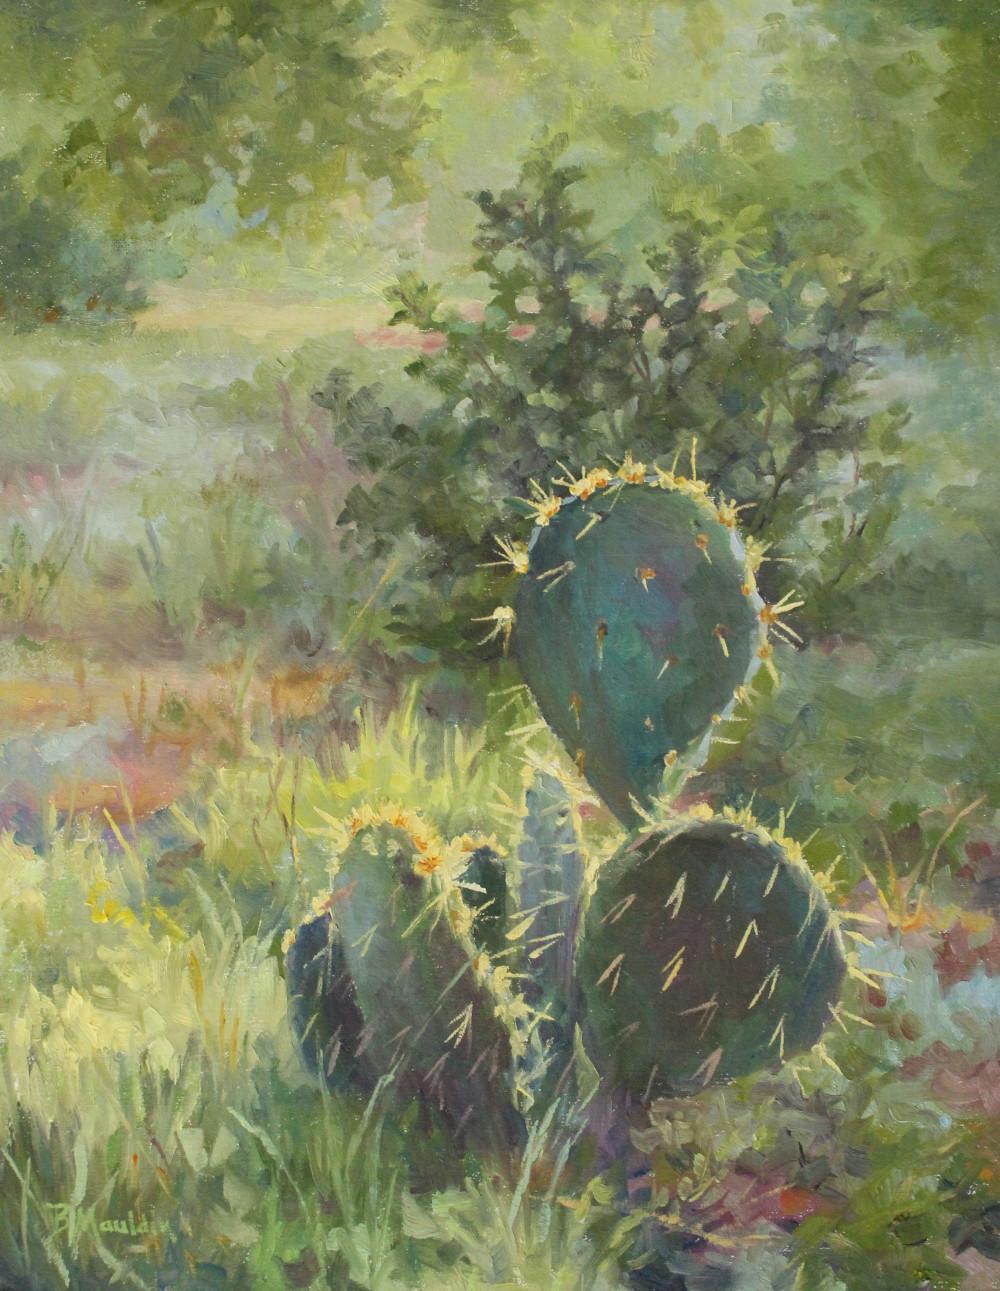 BARBARA MAULDIN Landscape Painting - "ARMED TO THE TEETH" TEXAS HILL COUNTRY CACTUS